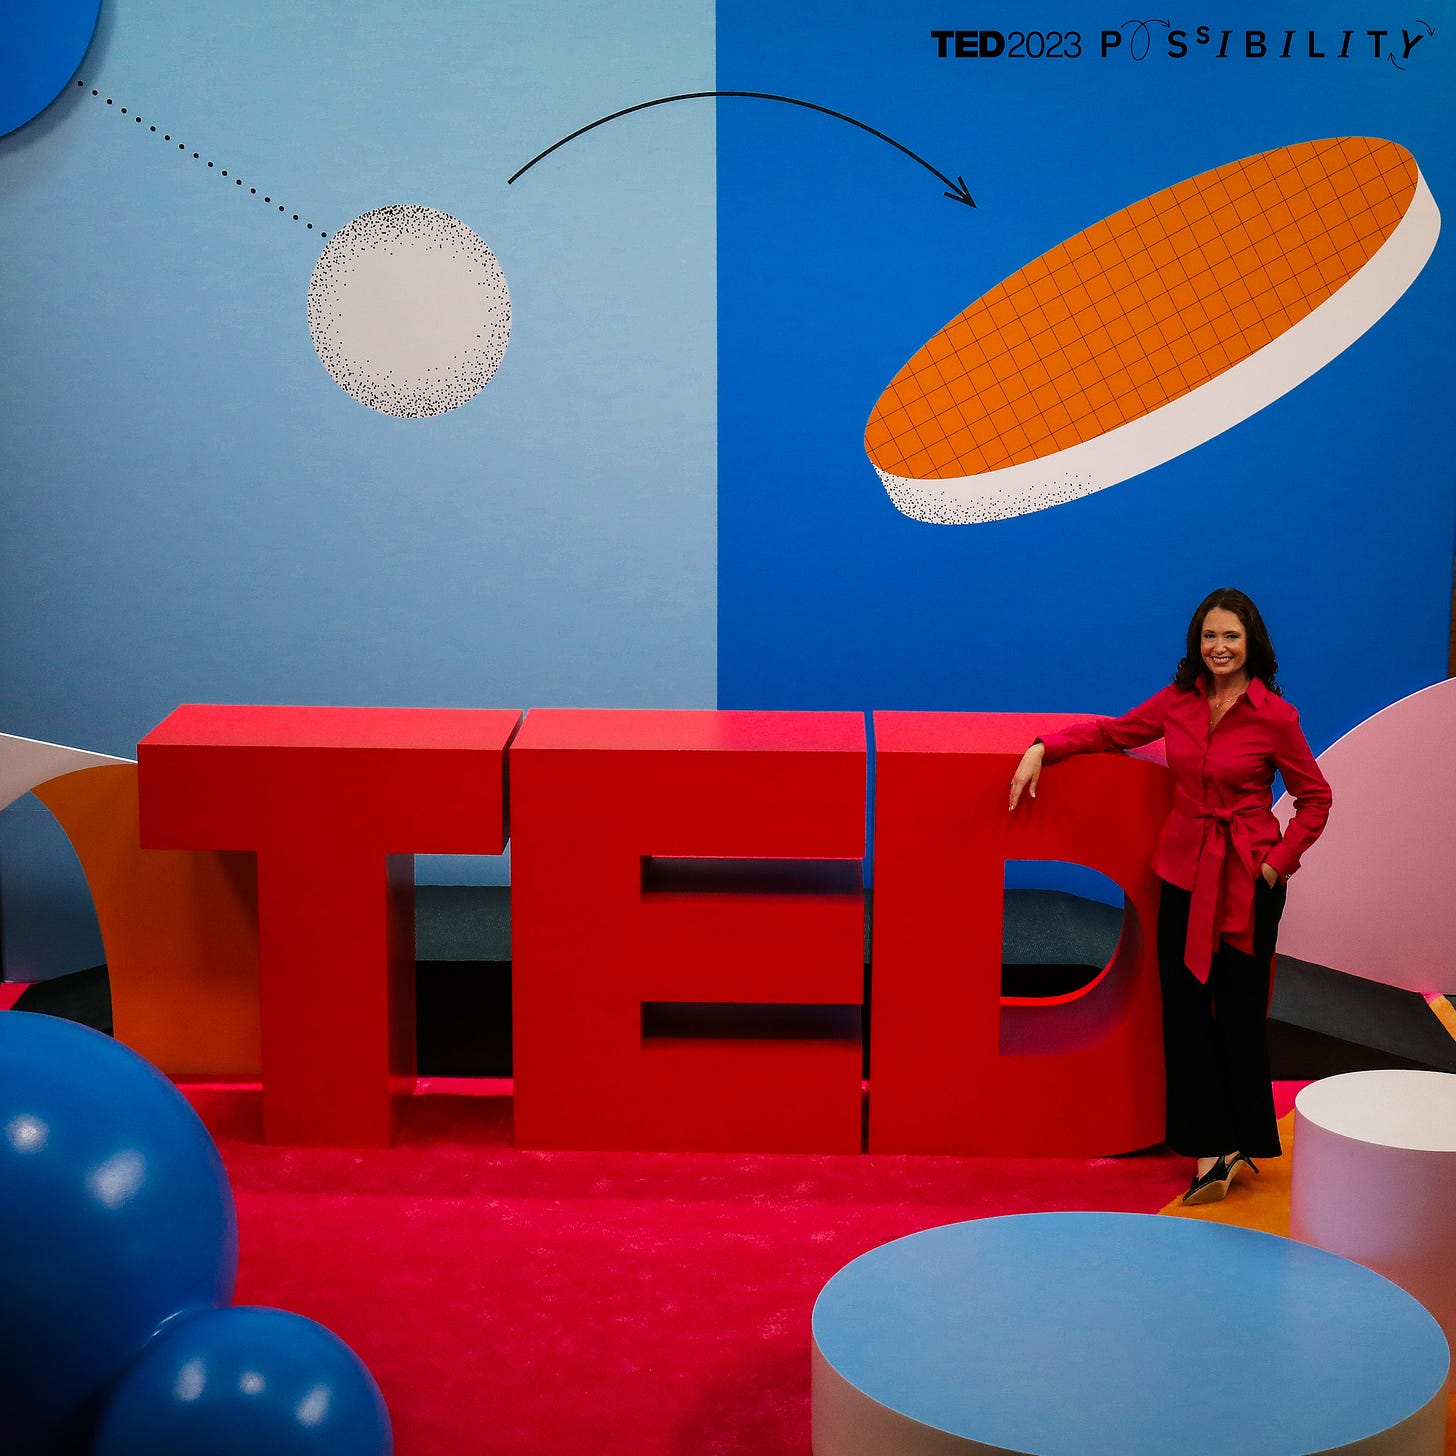 Jennifer leaning on giant TED sign on photo stage